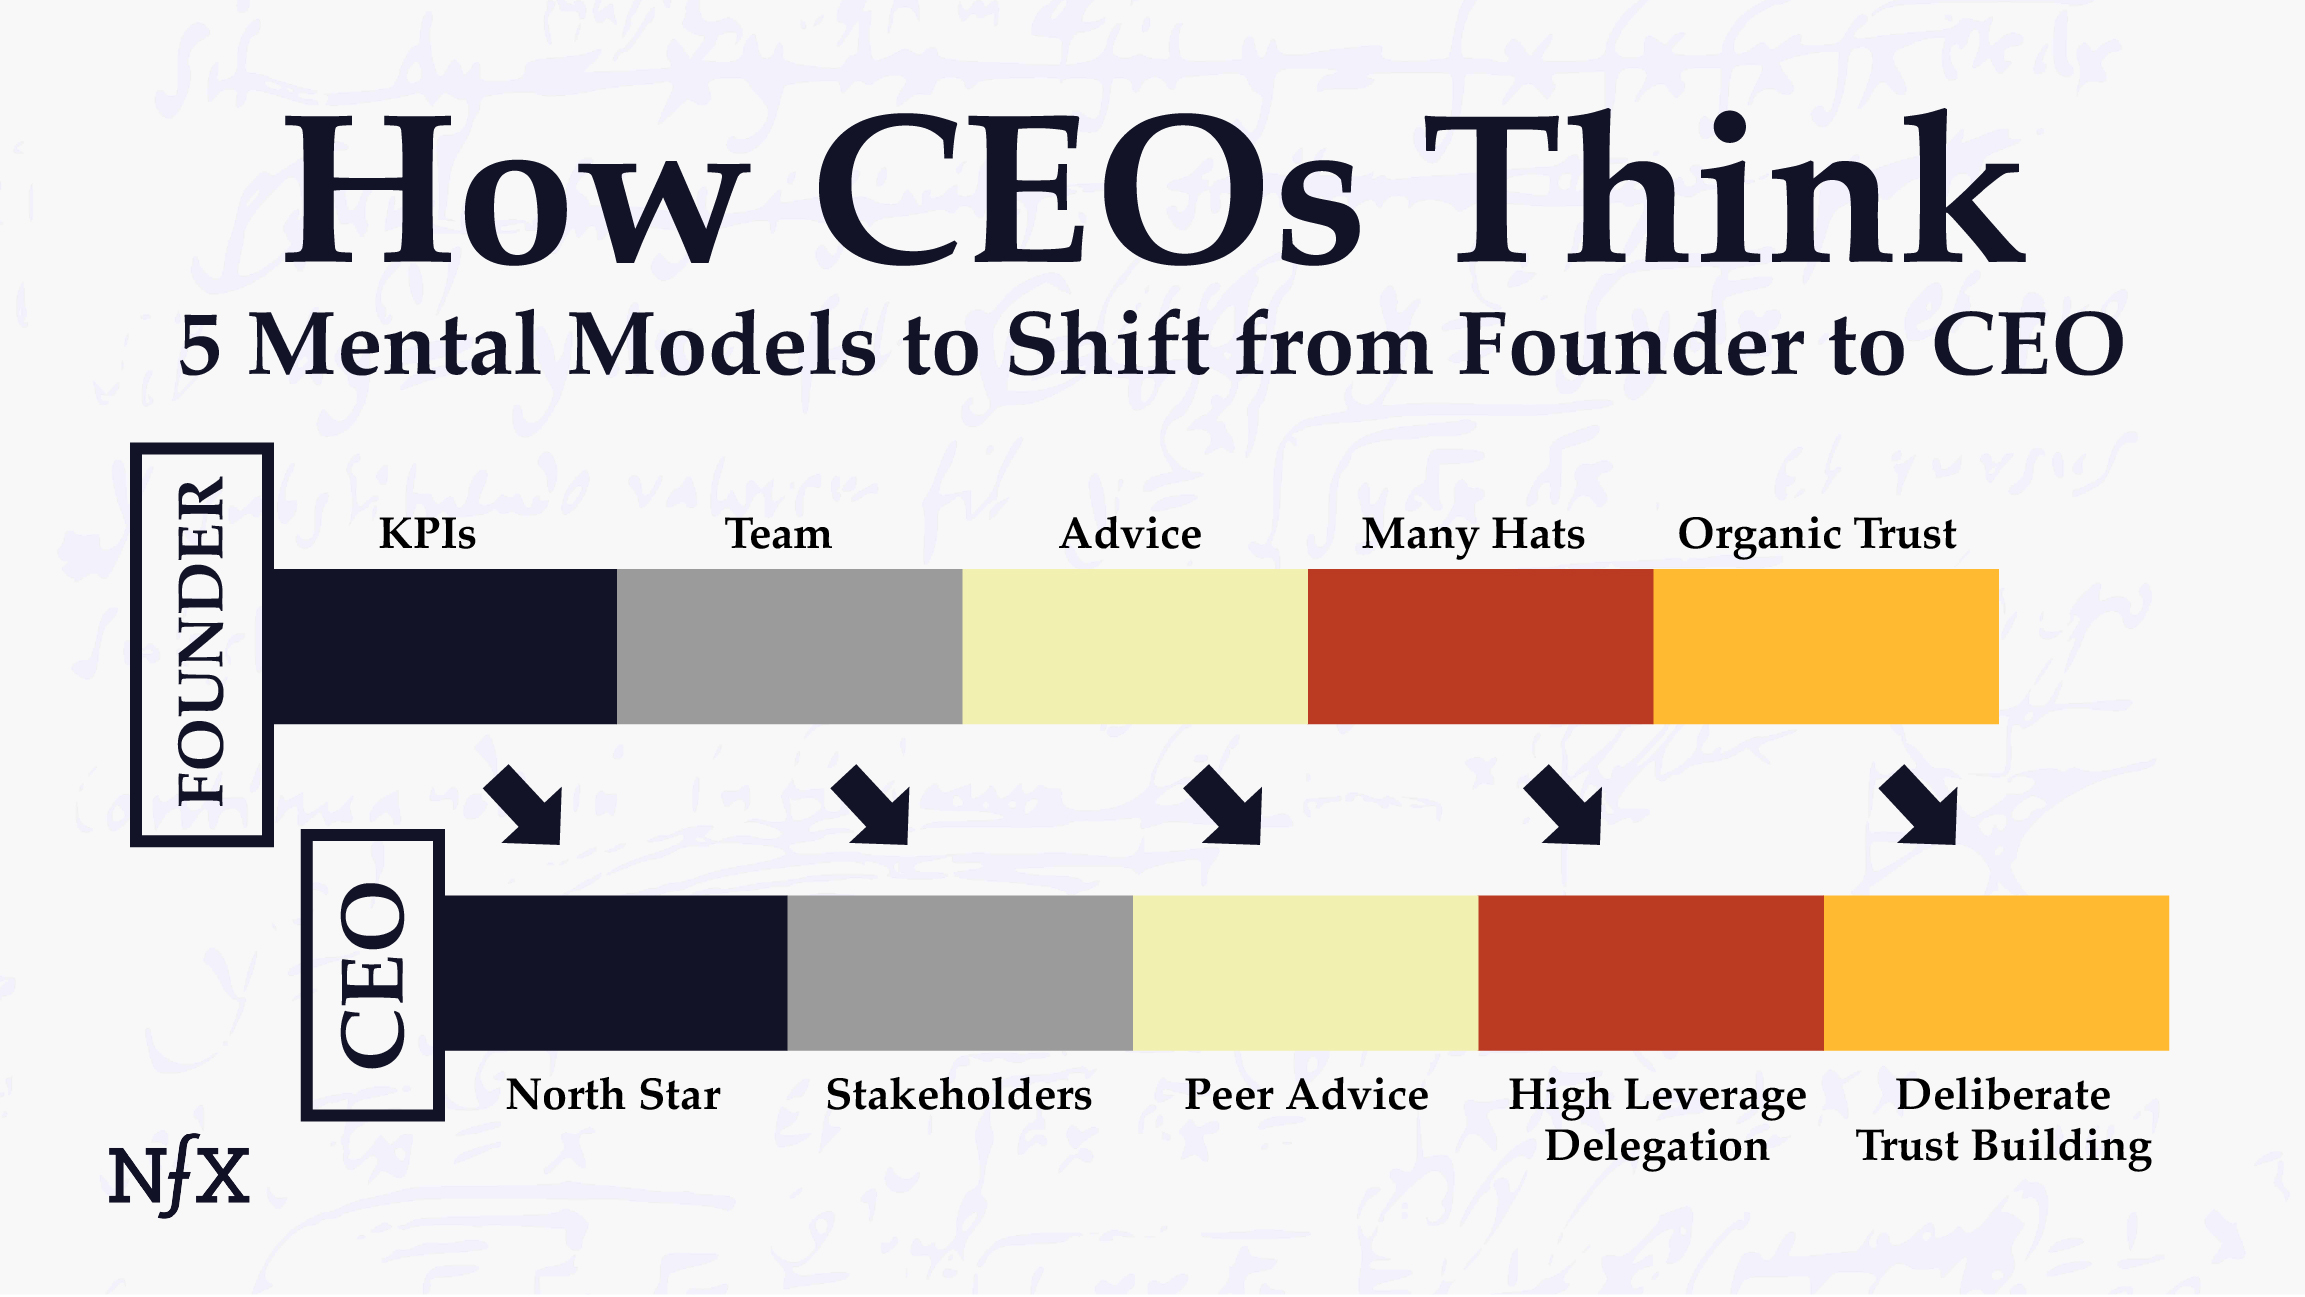 How CEOs Think: 5 Mental Models to Shift from Founder to CEO